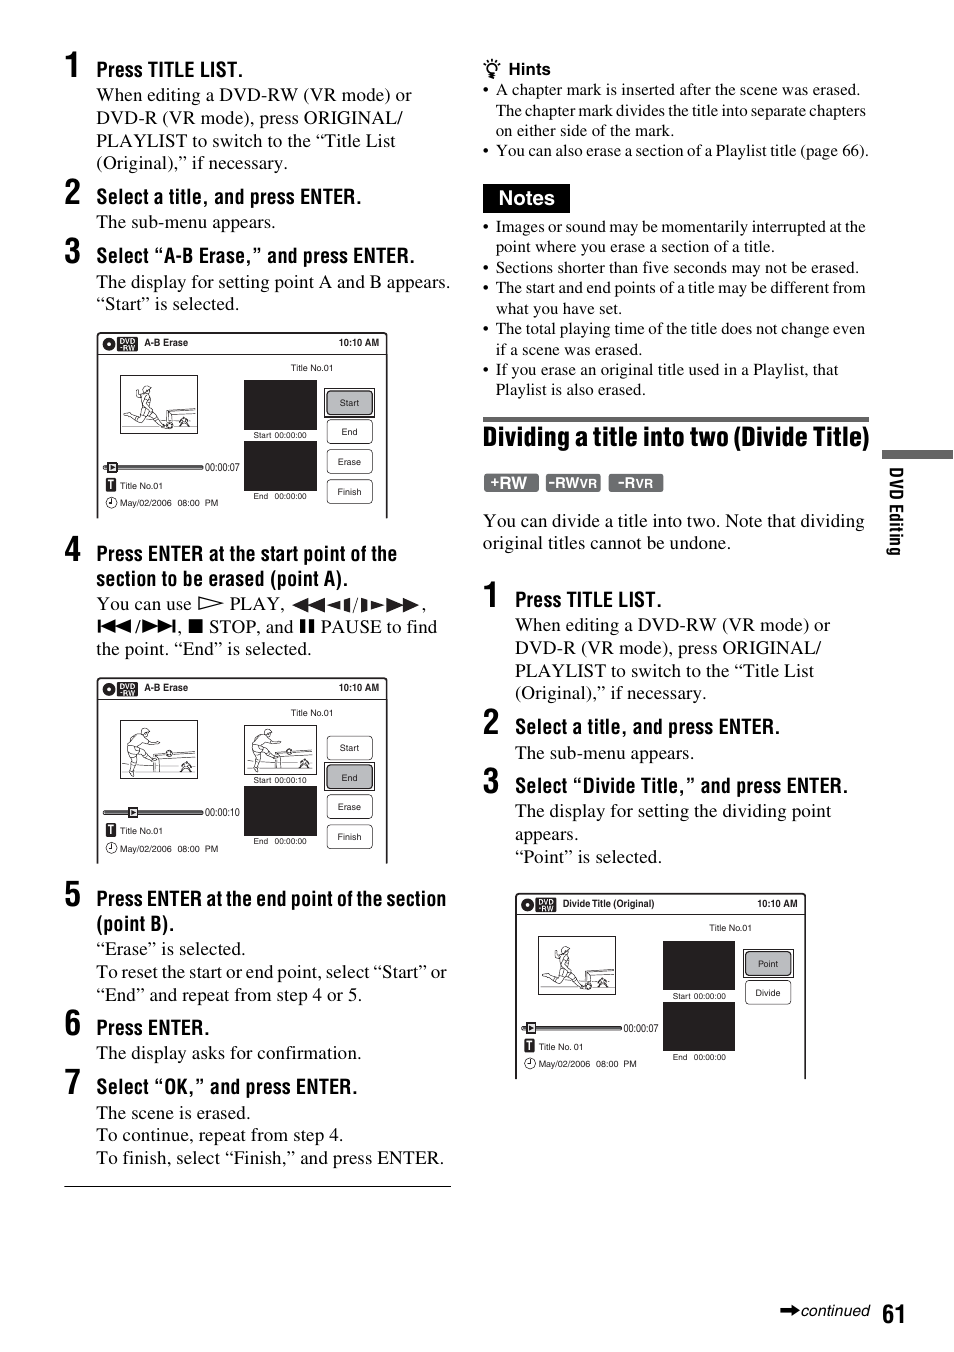 Dividing a title into two (divide title), Press title list, Select a title, and press enter | Select “a-b erase,” and press enter, Press enter, Select “ok,” and press enter, Select “divide title,” and press enter | Sony RDR-VX521 User Manual | Page 61 / 132